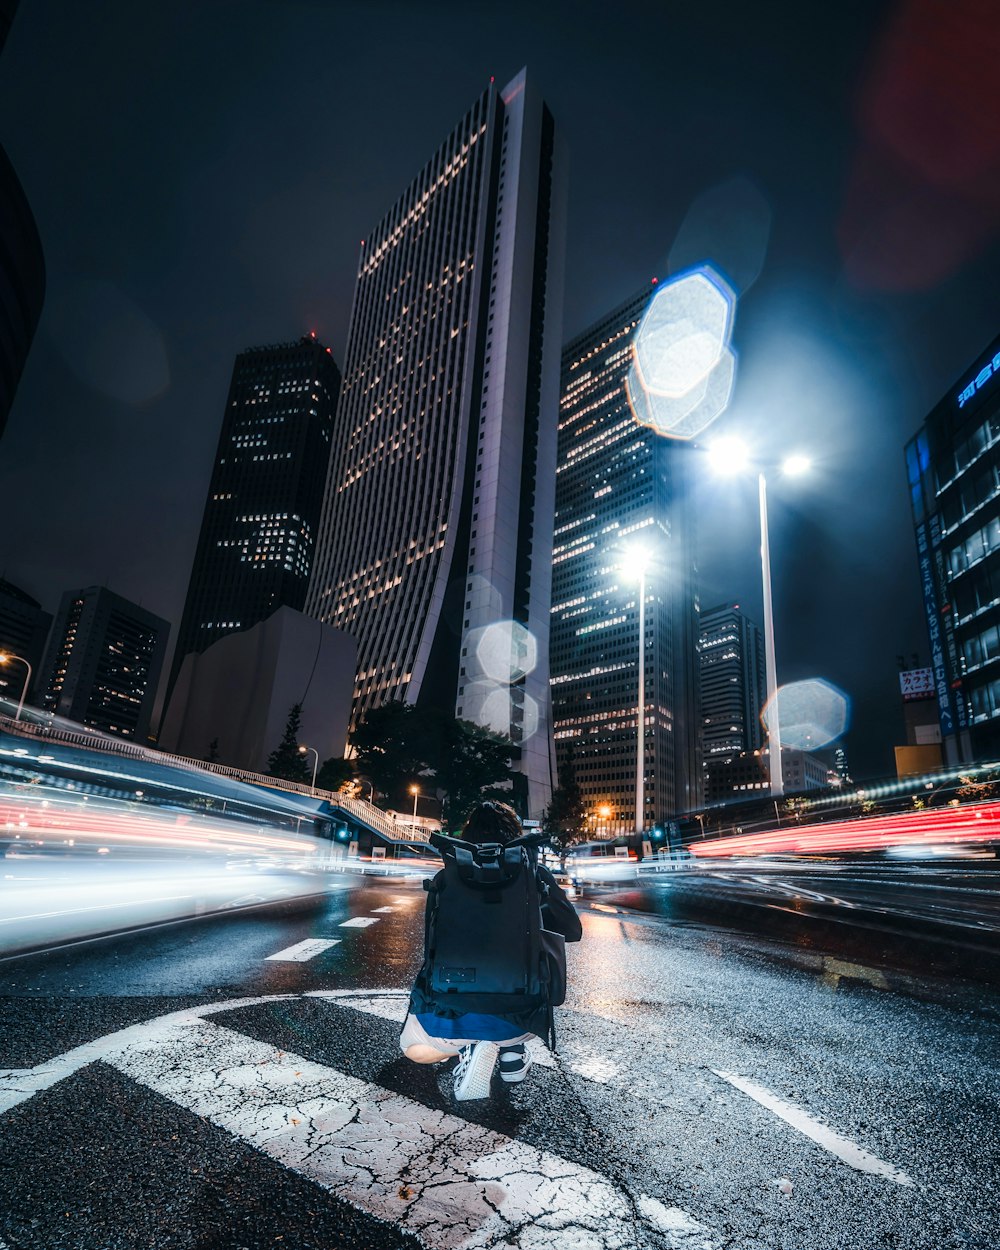 a person riding a scooter on a city street at night